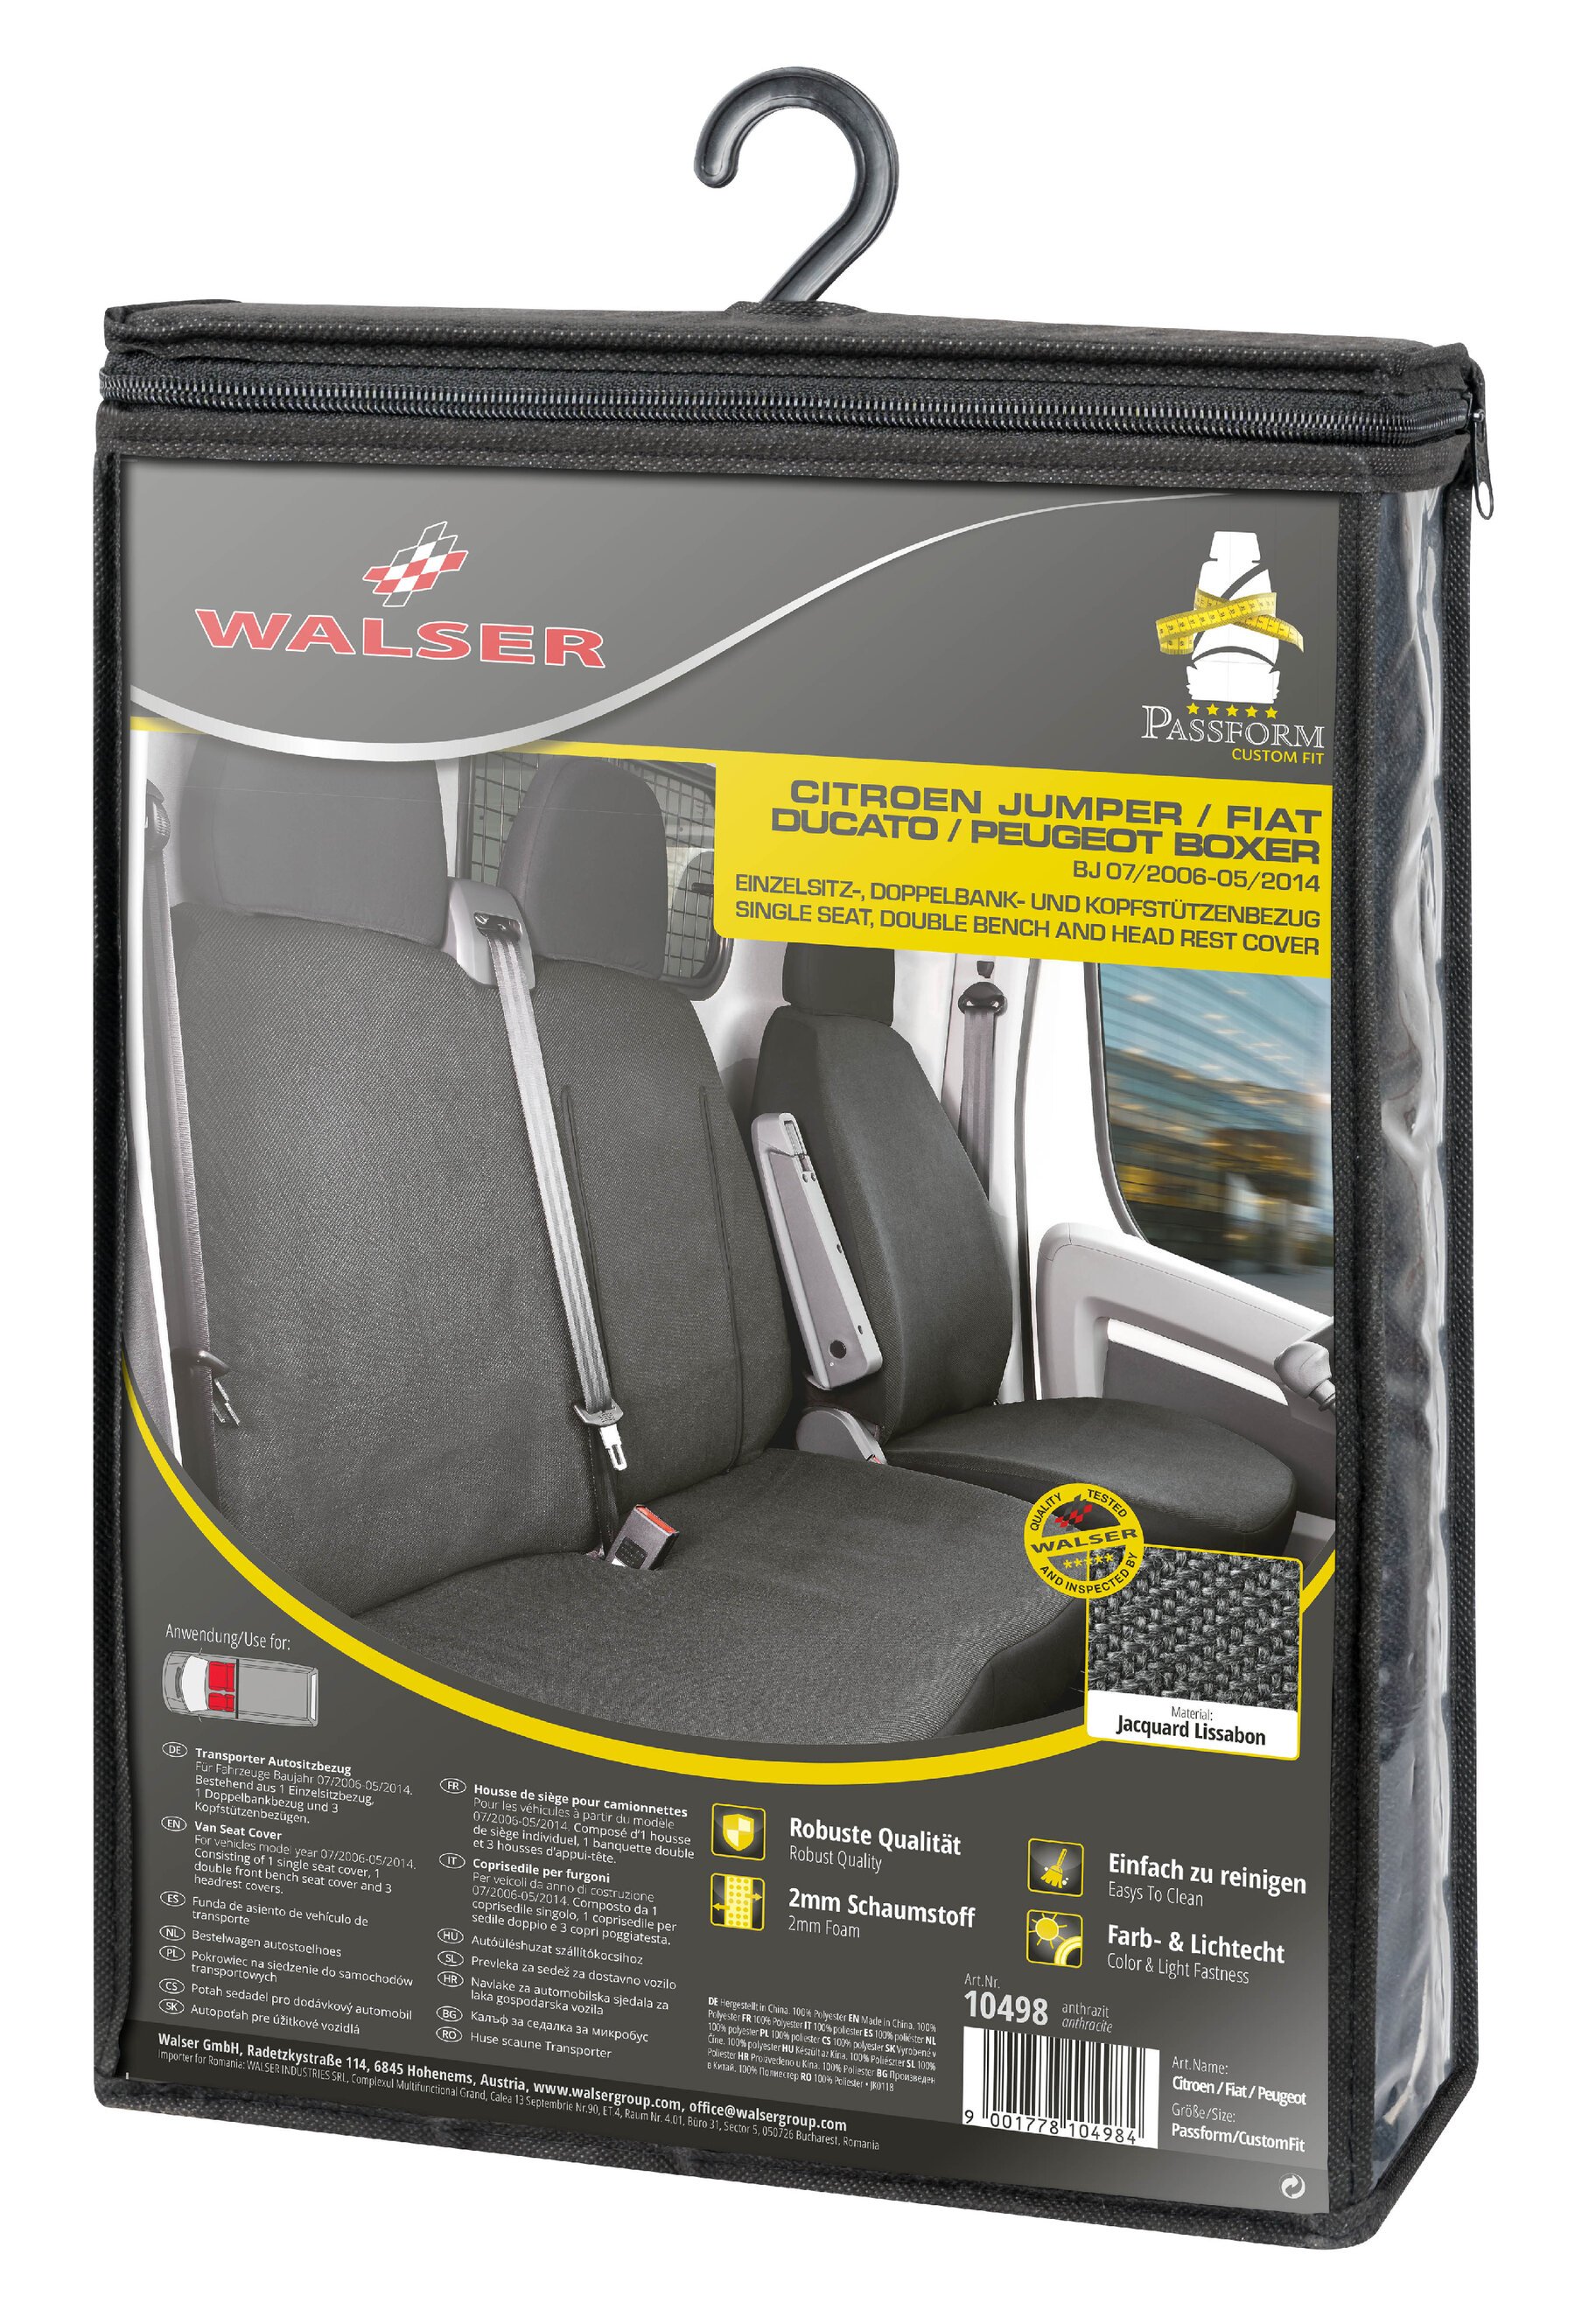 Seat cover made of fabric for Citroen Jumper, Fiat Ducato, Peugeot Boxer, single seat cover, double seat cover